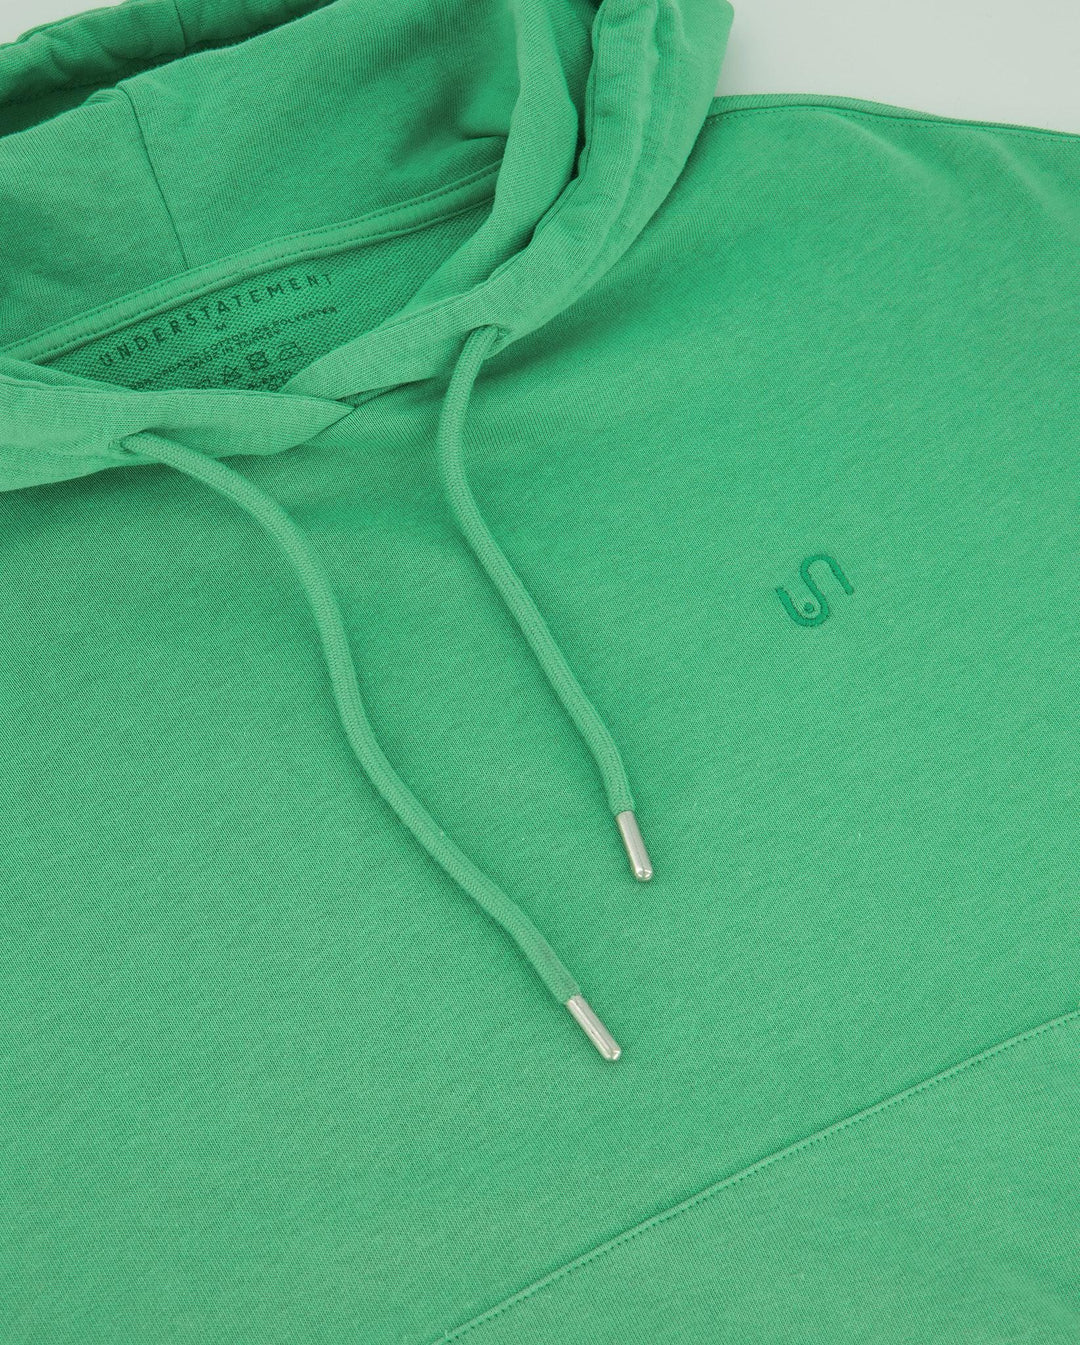 Hooded Sweat Green Ivy